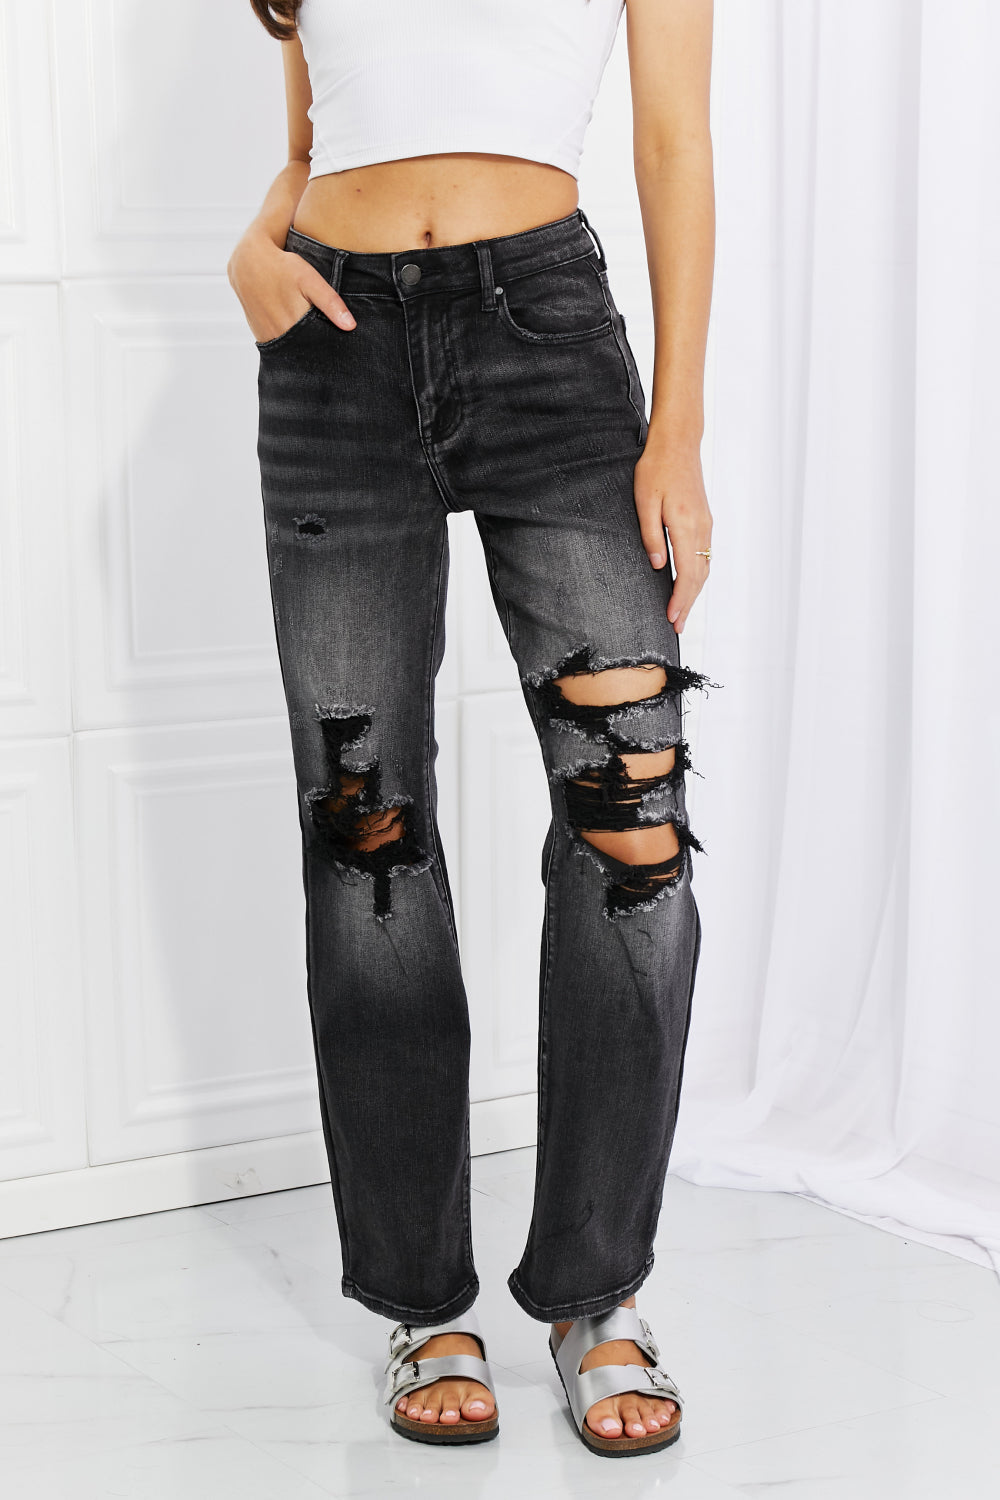 BLACK RISEN Full Size Lois Distressed Loose Fit Jeans - Ships from The USA - women's jeans at TFC&H Co.